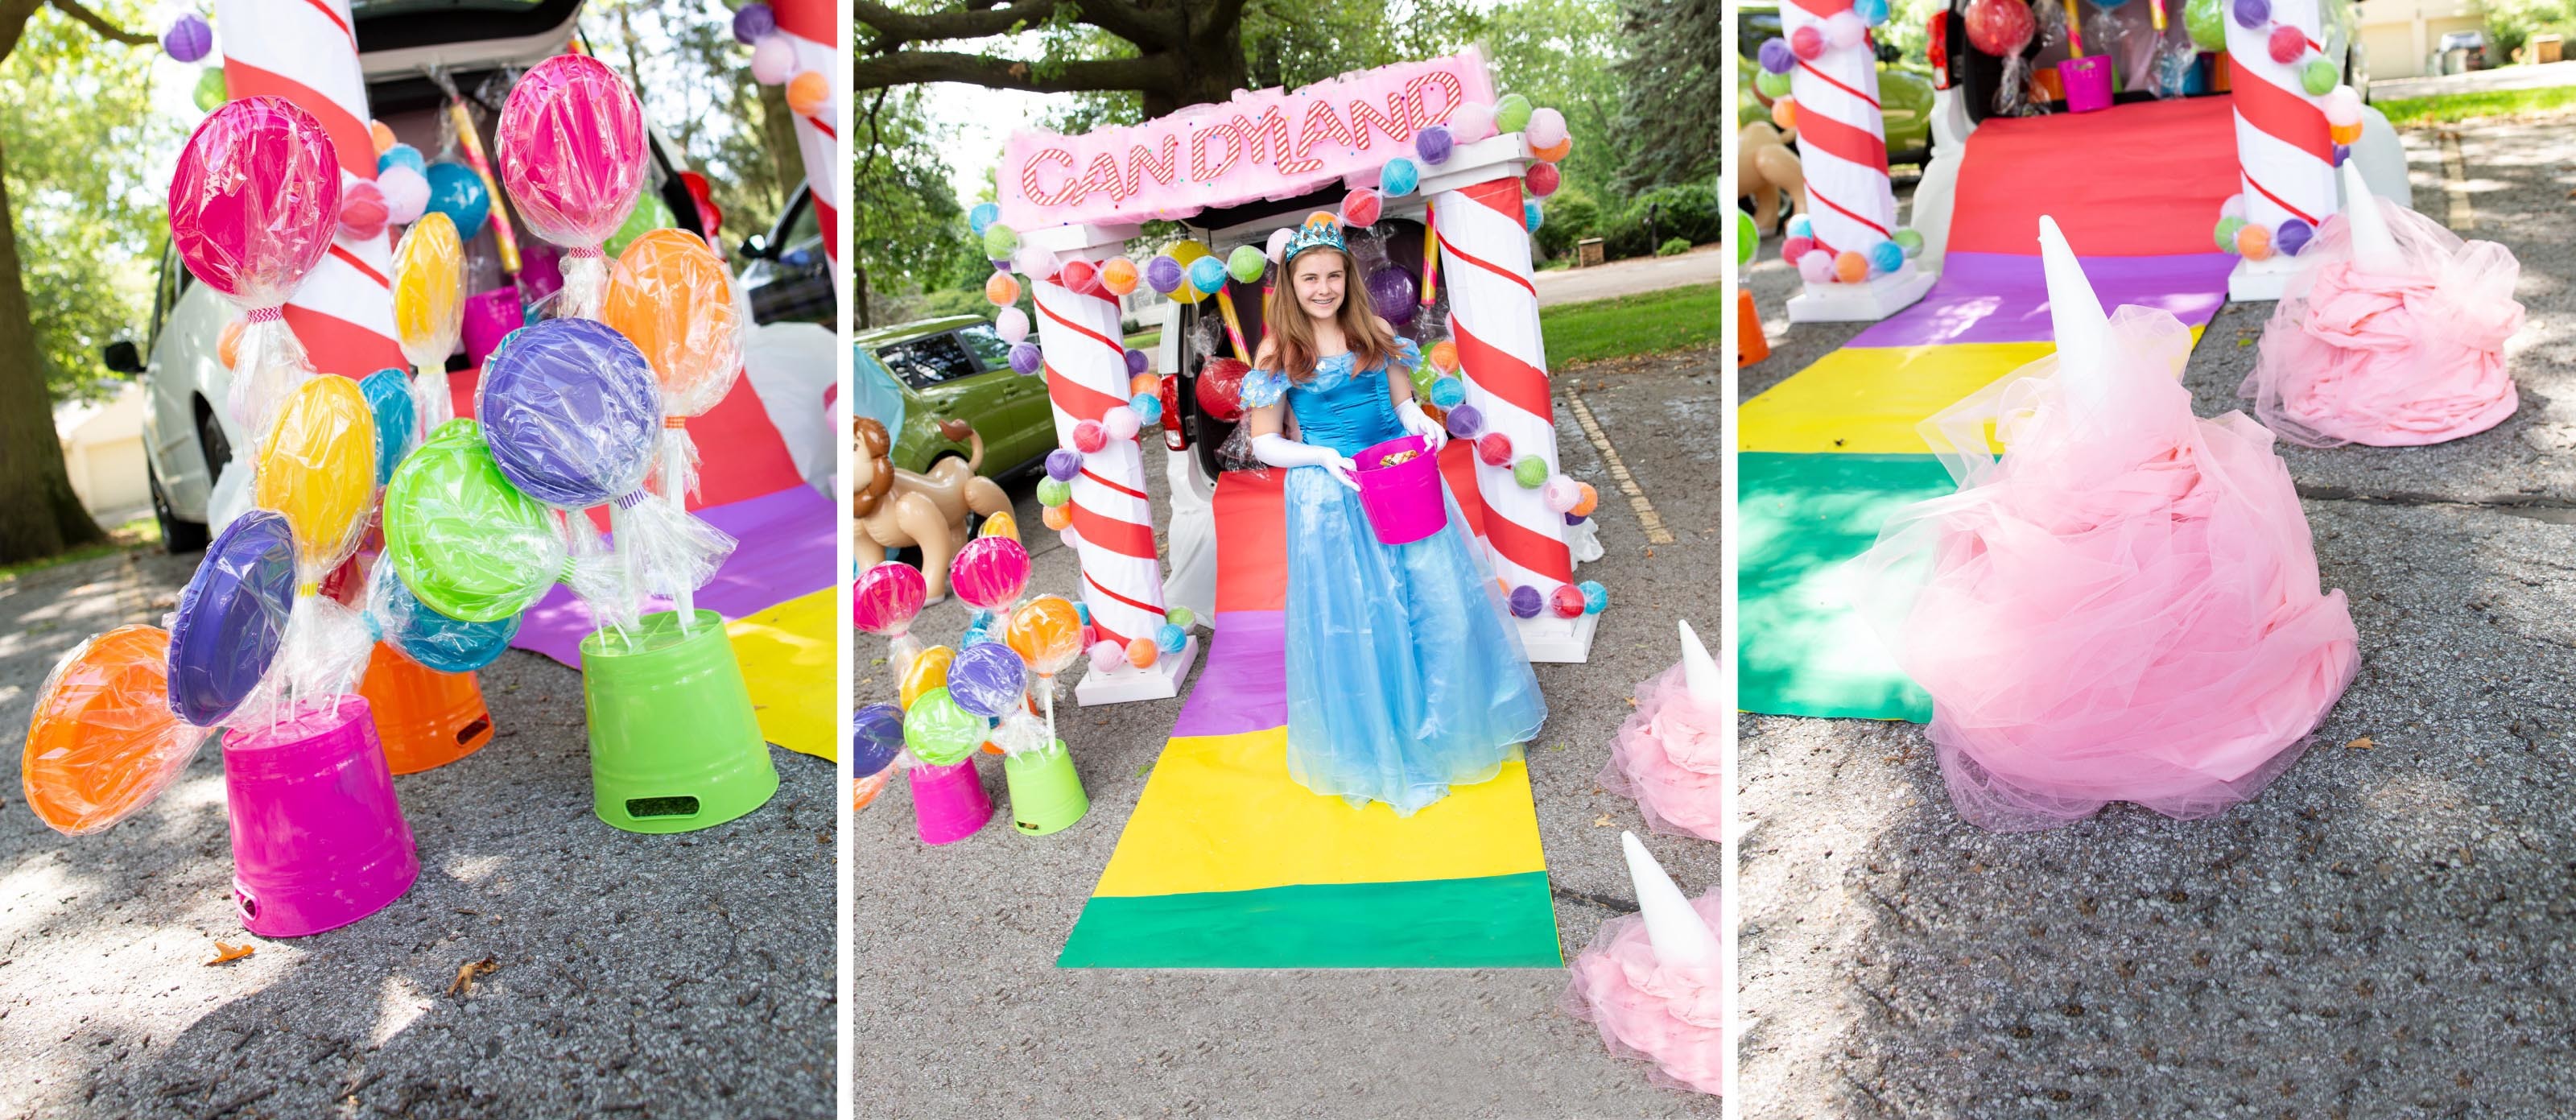 Candyland Party Ideas Games